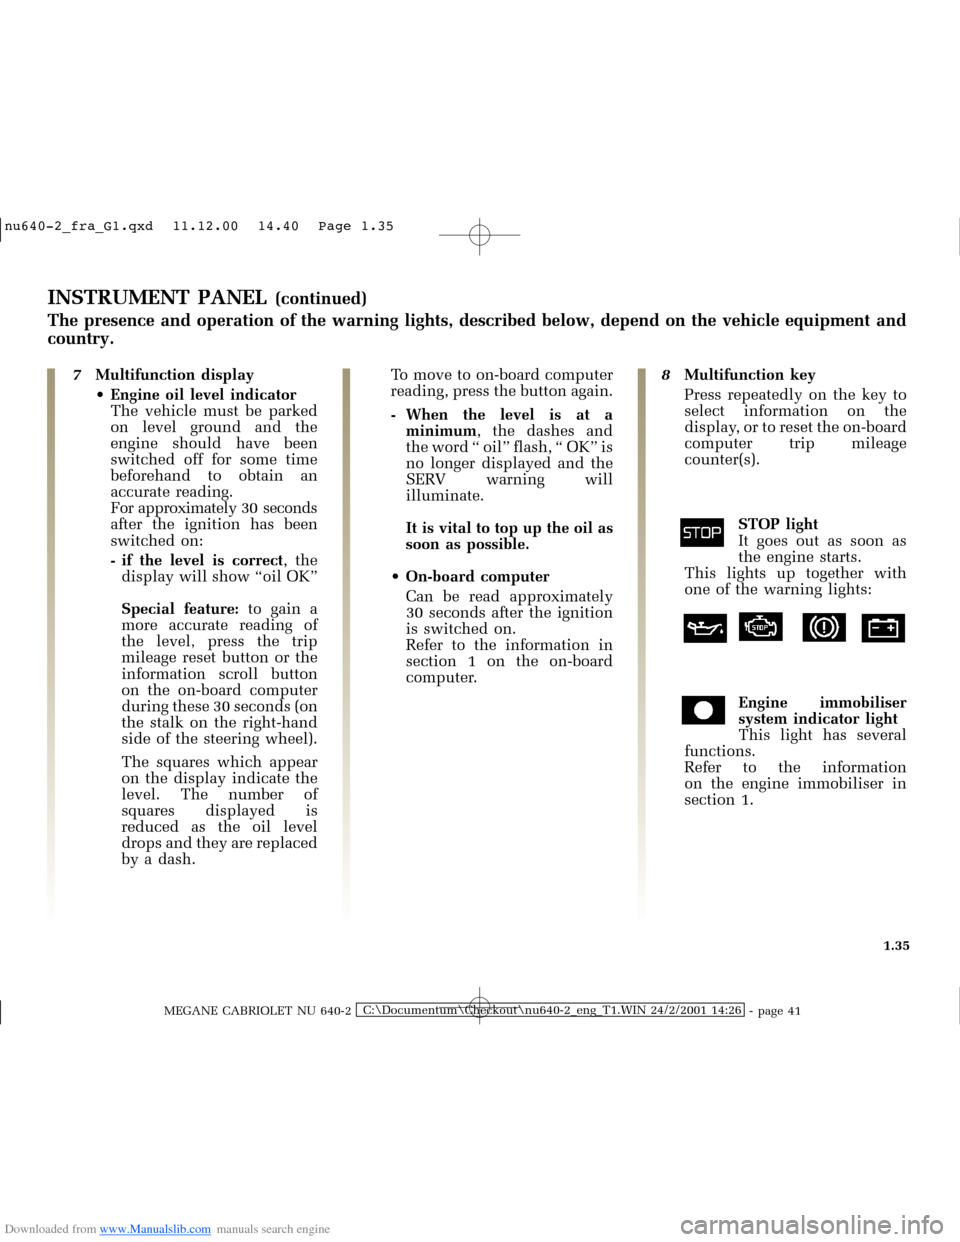 RENAULT MEGANE 2000 X64 / 1.G Owners Manual Downloaded from www.Manualslib.com manuals search engine �Q�X������B�I�U�D�B�*���T�[�G� � ��������� � ������ � �3�D�J�H� ����
MEGANE CABRIOLET NU 640-2C:\Documentum\Chec